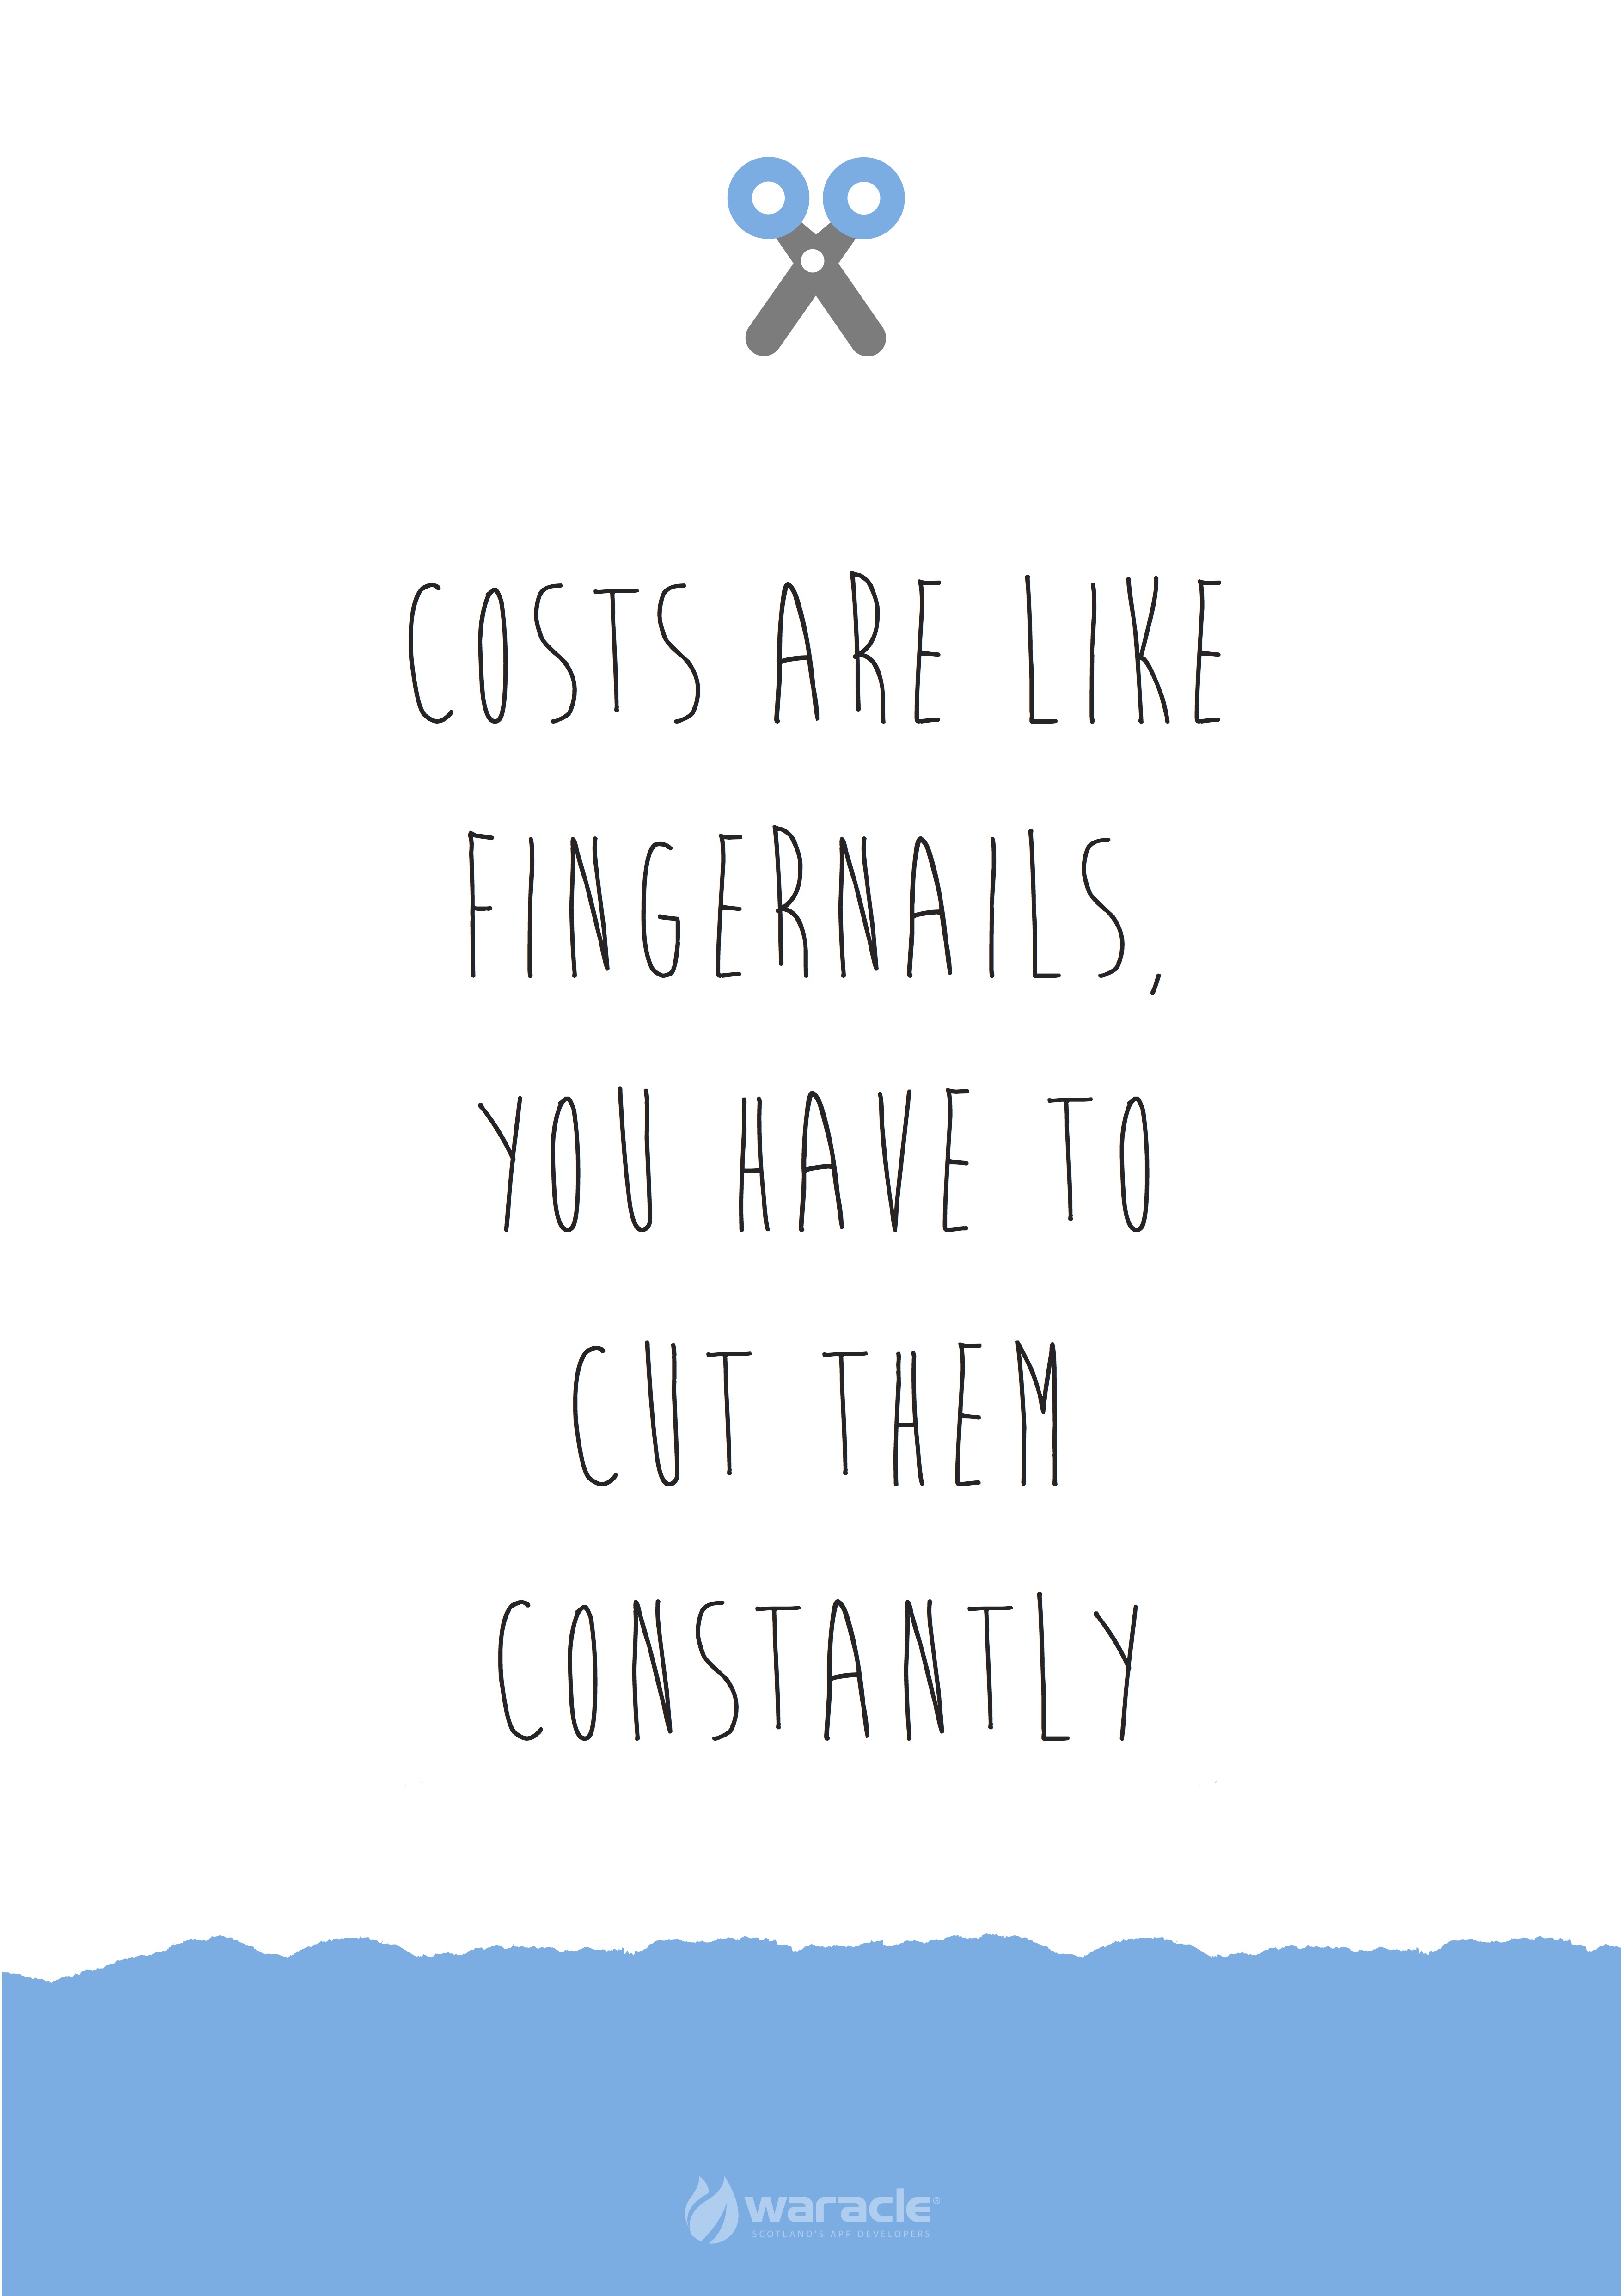 Costs are like fingernails, you have to cut them constantly. #mobile ...